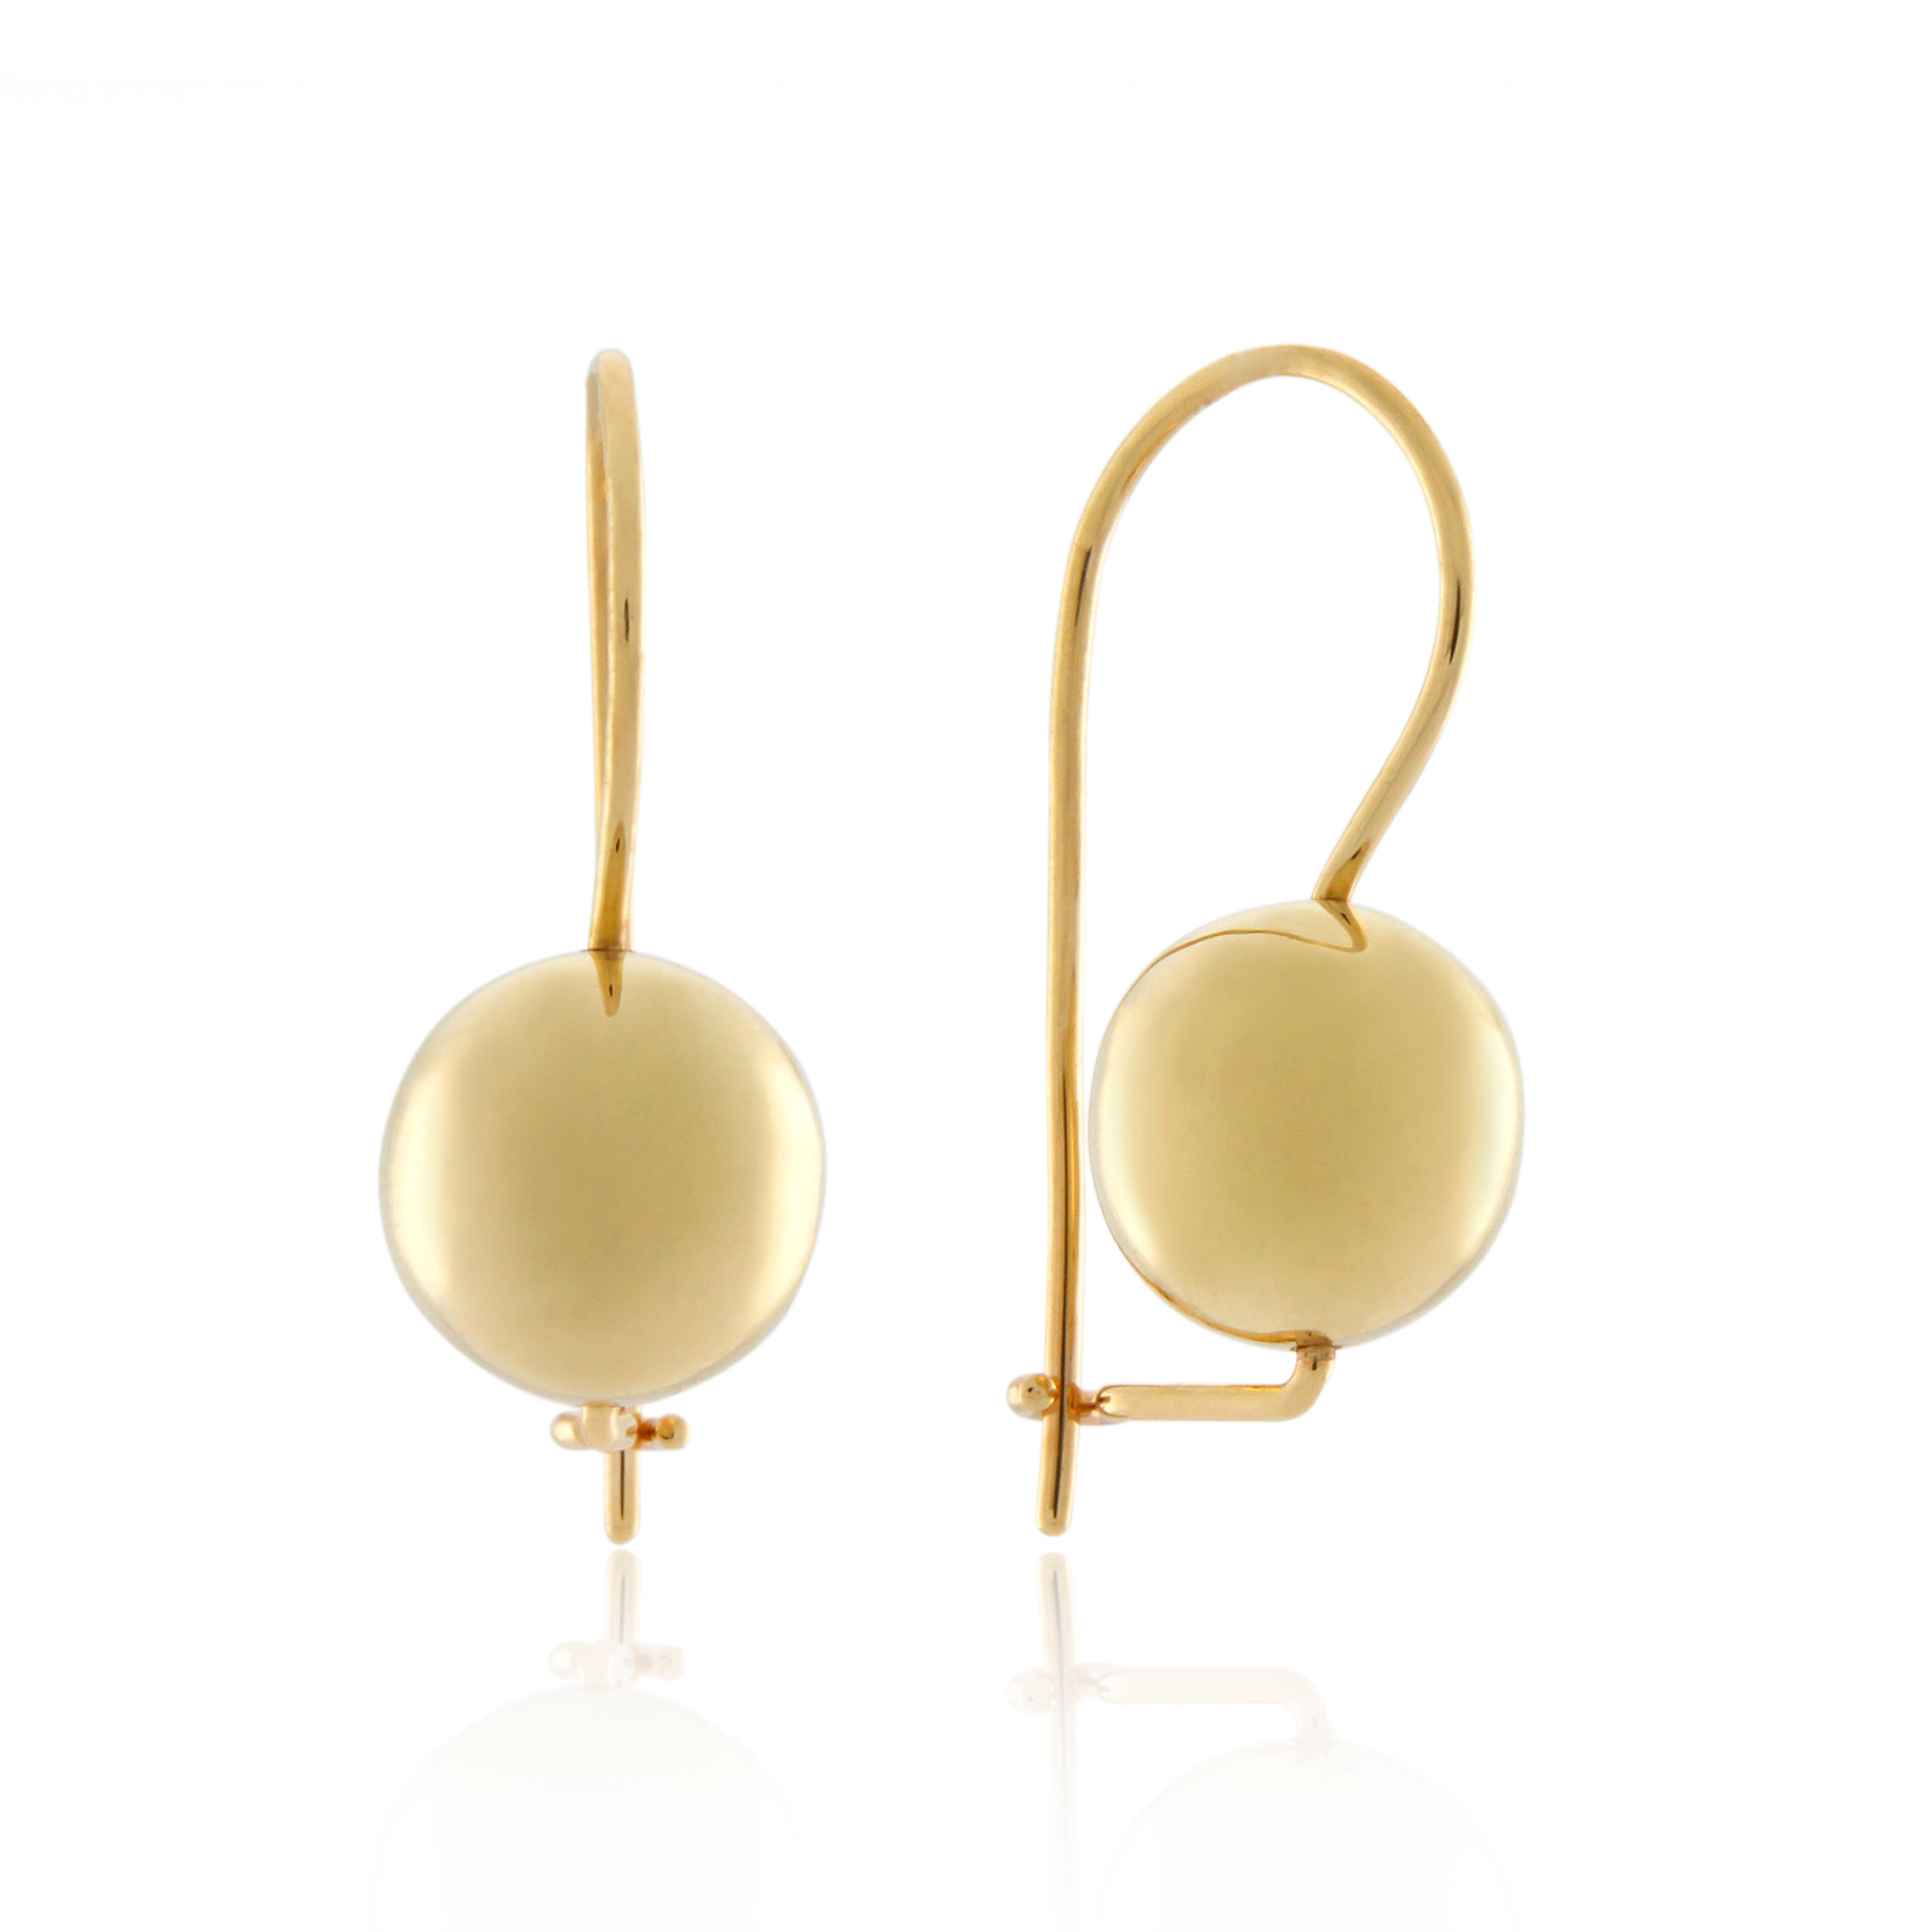 9ct Yellow Gold Euroball Earrings 8mm